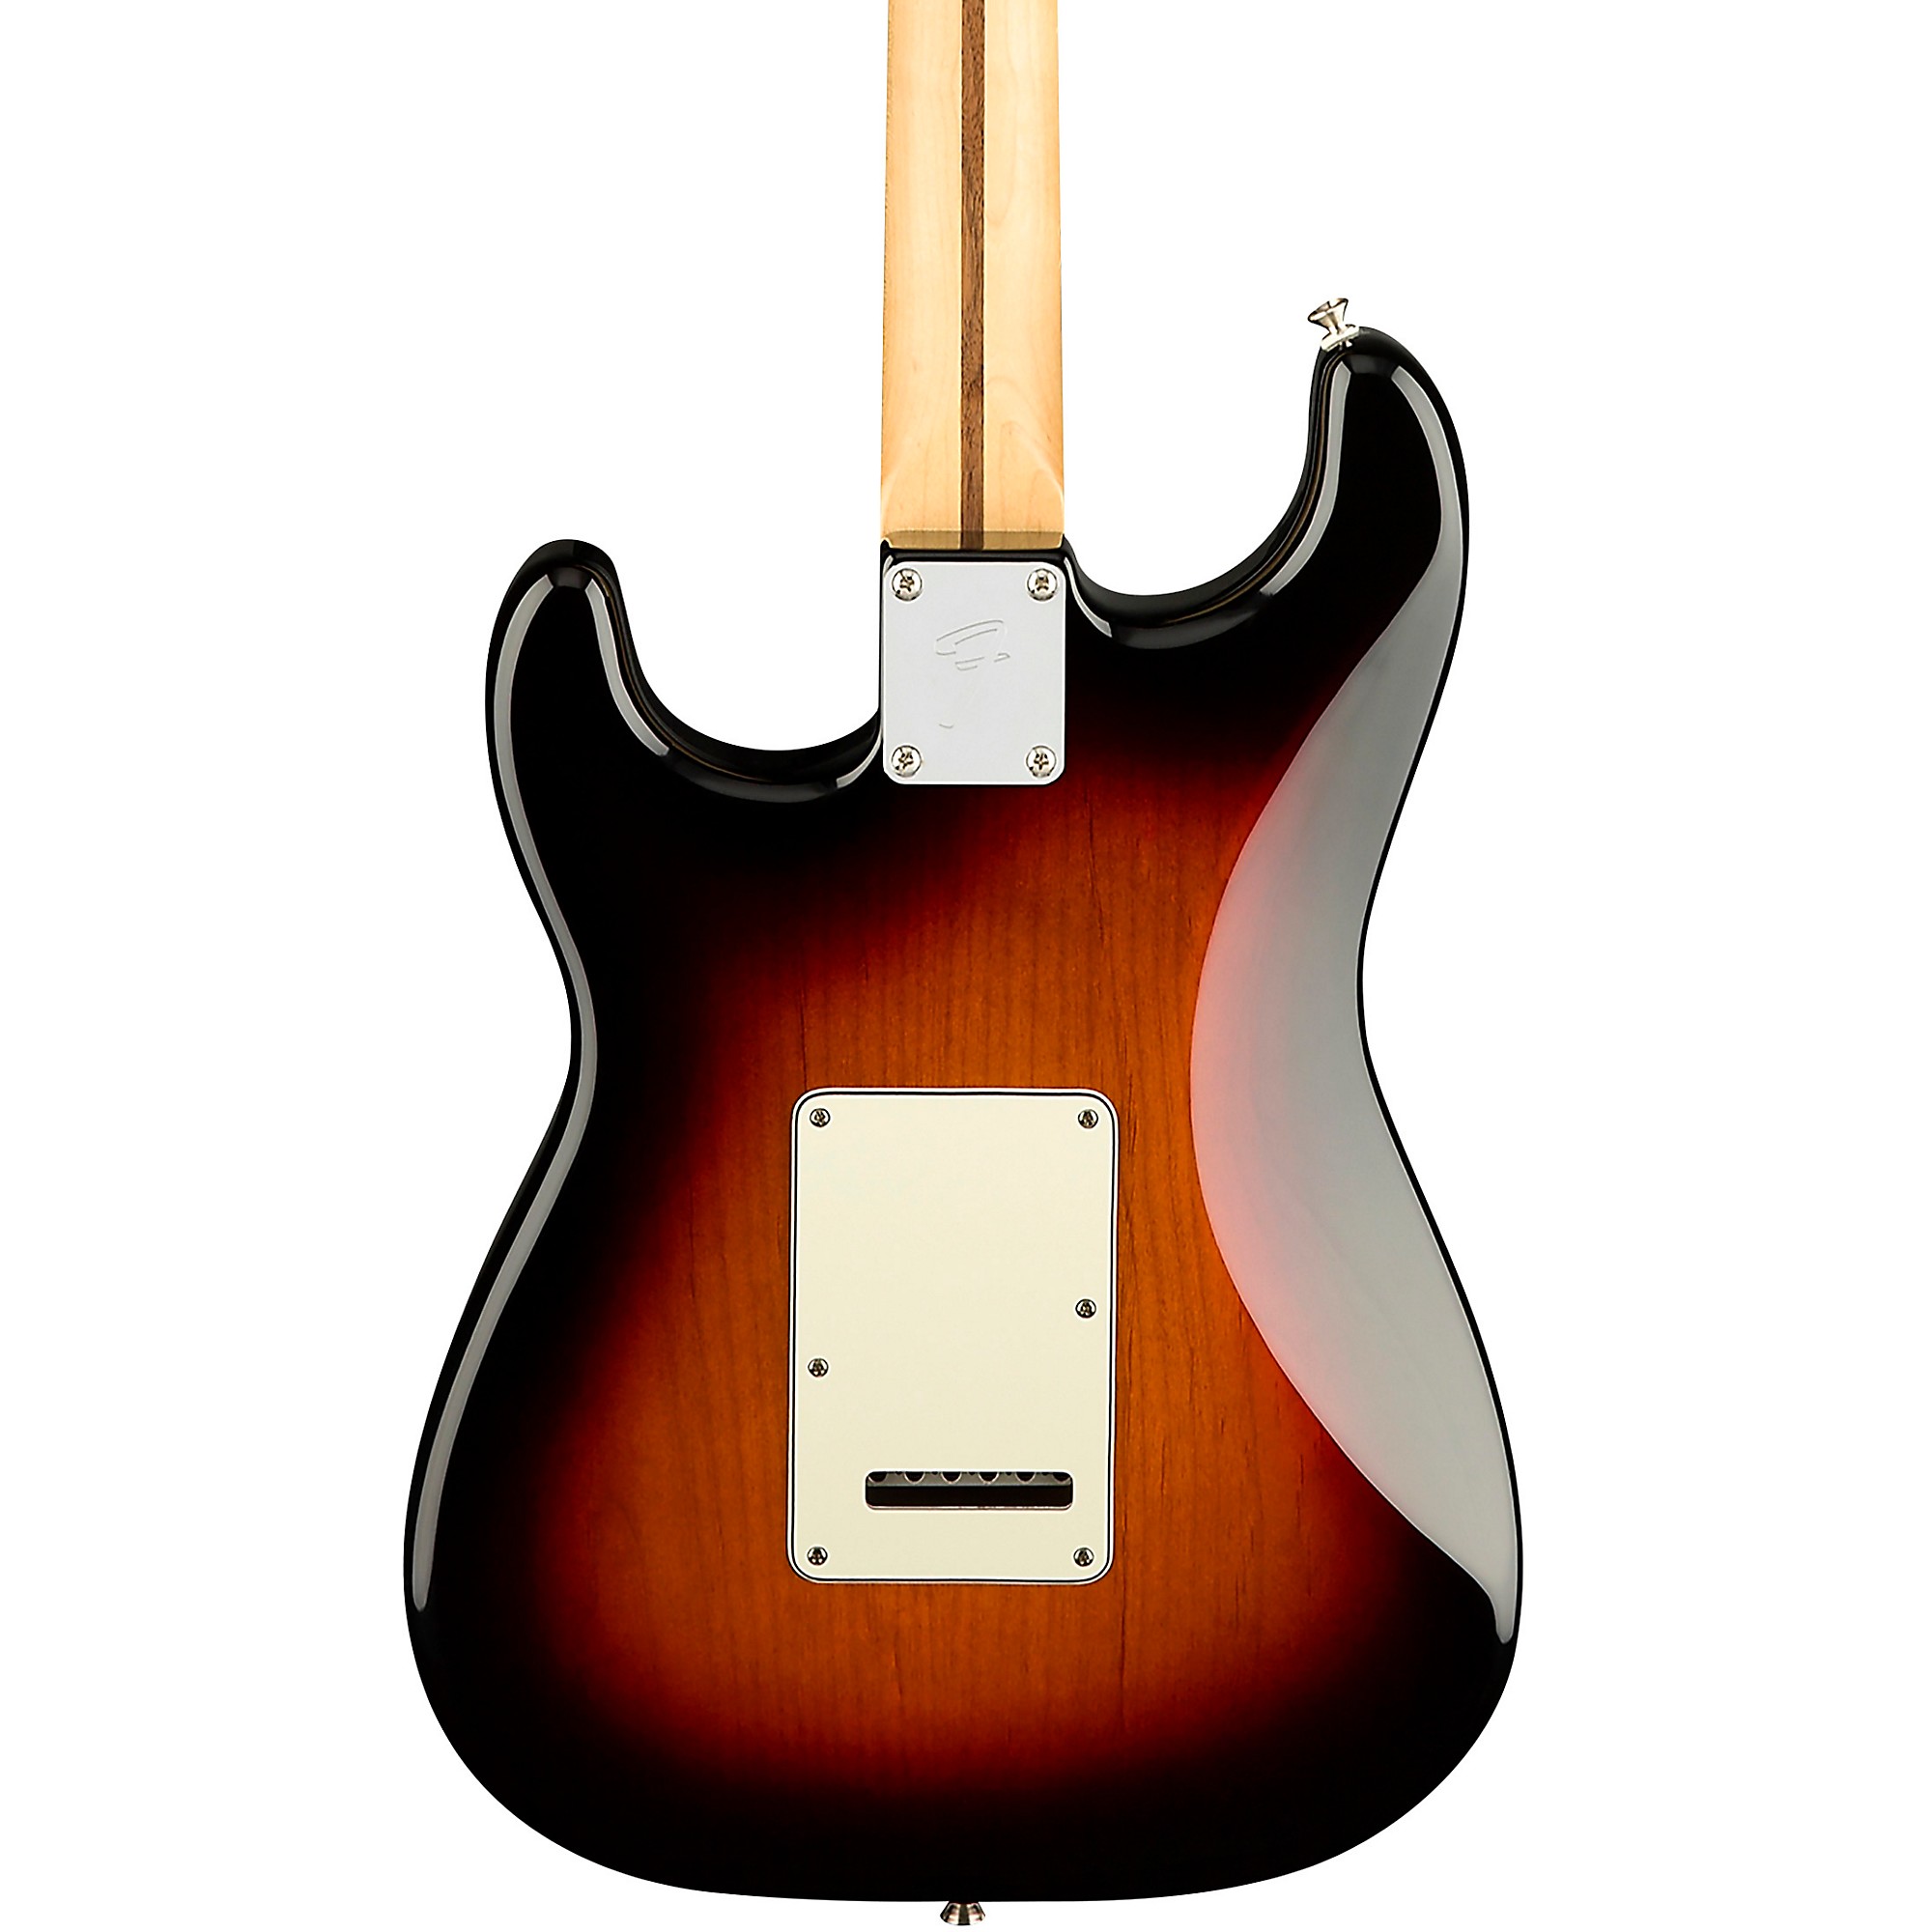 Fender Player Series Stratocaster Maple Fingerboard Electric